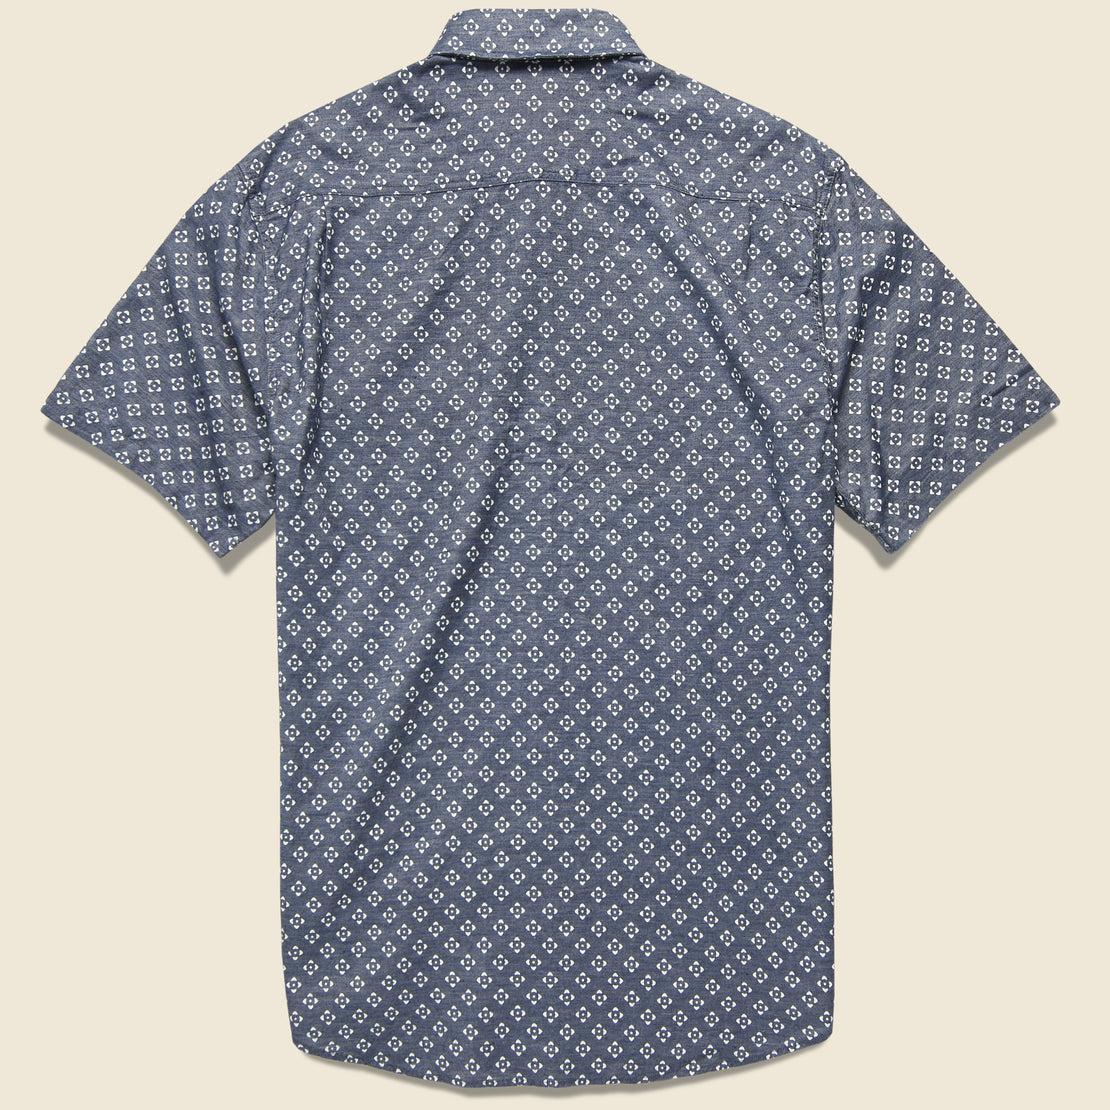 Coast Shirt - Atlas Print - Faherty - STAG Provisions - Tops - S/S Woven - Other Pattern